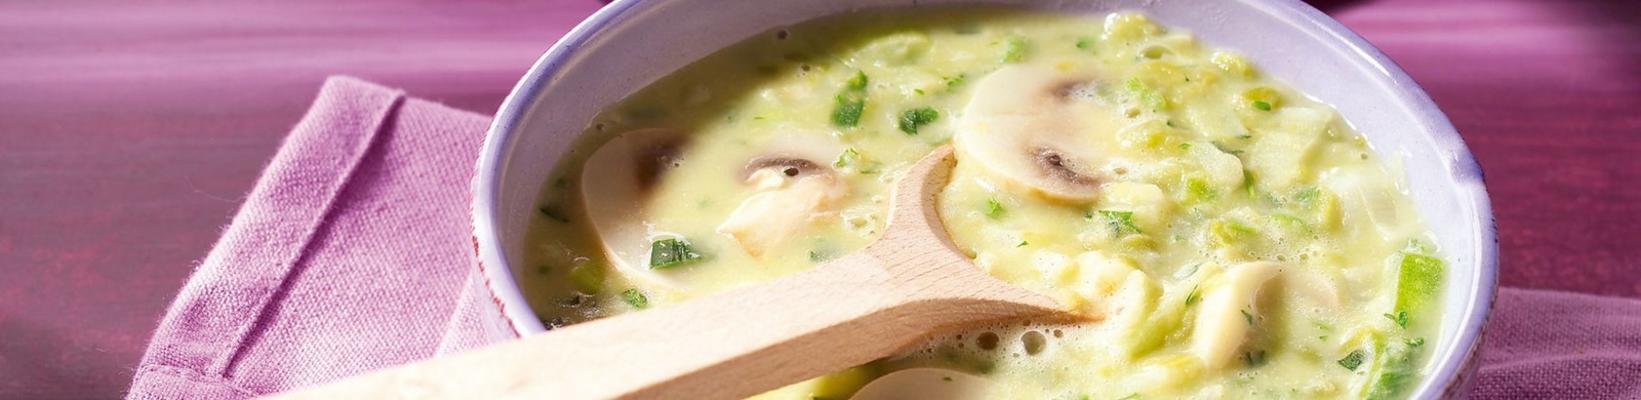 pea soup with mushrooms